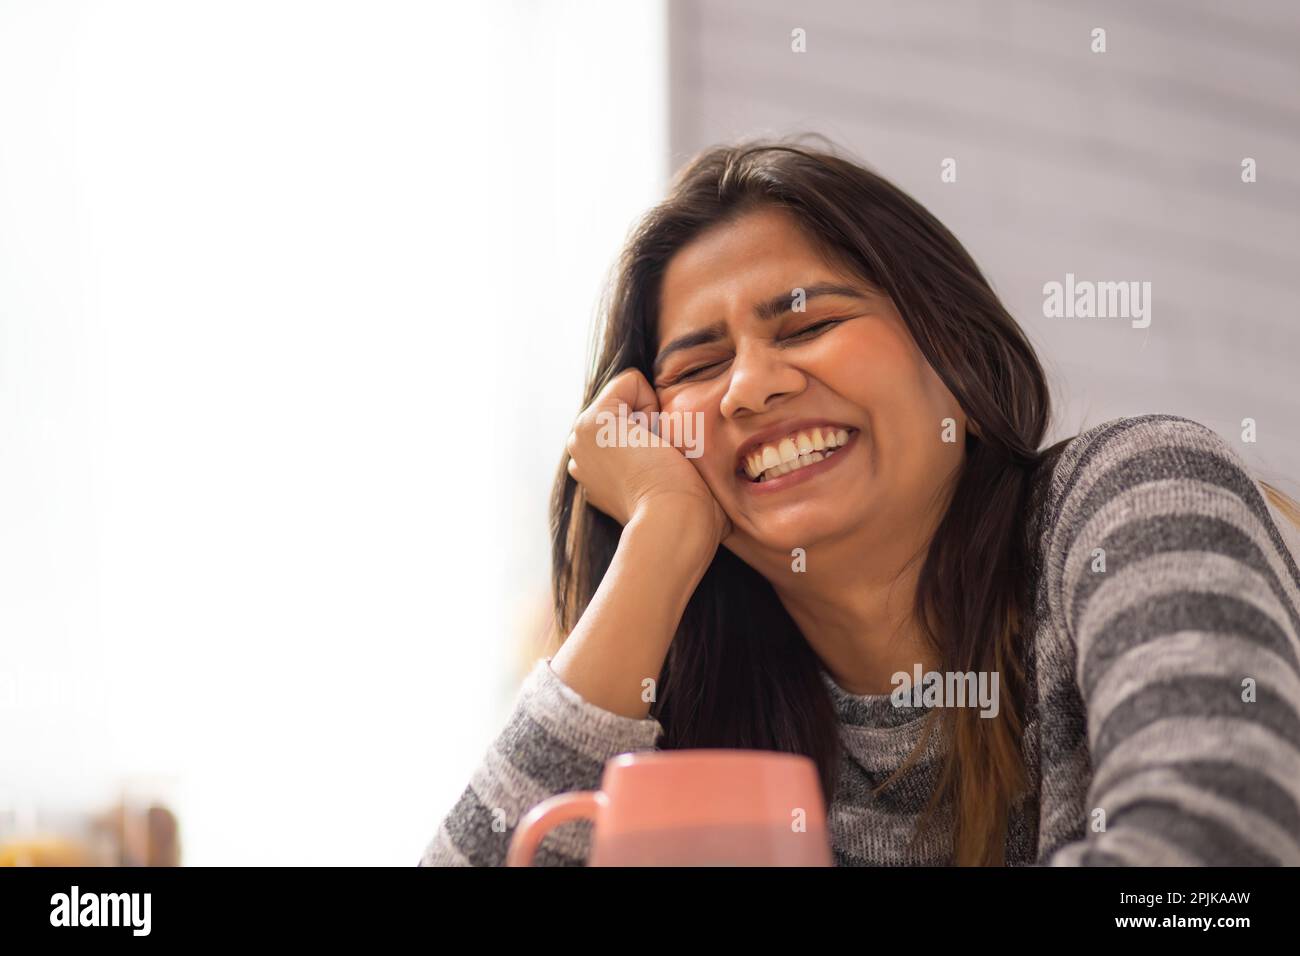 Close-up portrait of smiling woman drinking coffee at home Stock Photo